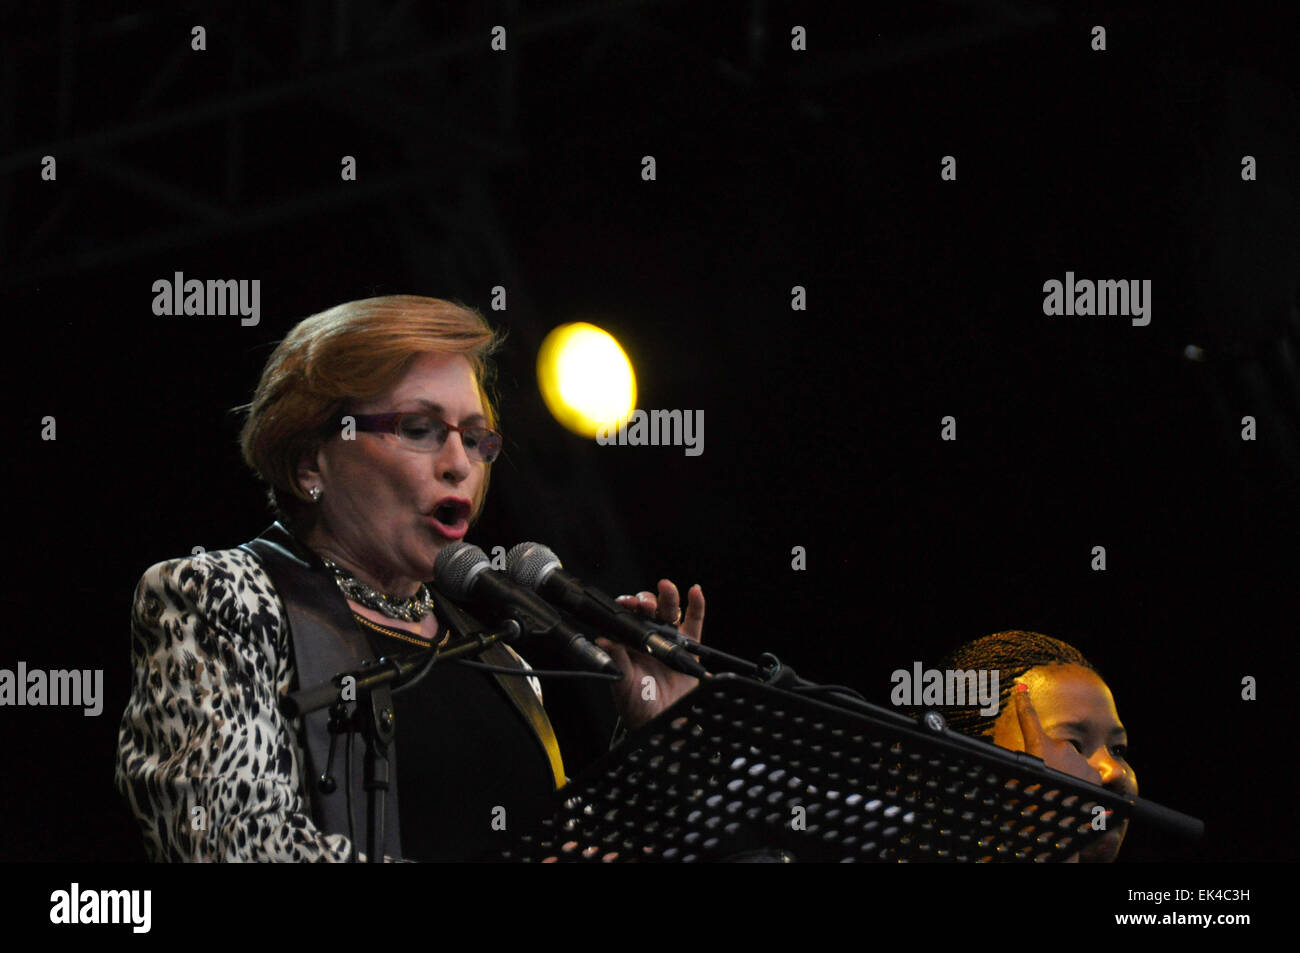 Helen Zille, Premier of the Western Cape speaks at the Cape Town Stadium memorial event for Mandela, 11.12.2013.The event  Nelson Mandela: A Life Celebrated was held to celebrate the life of Nelson Mandela who had died  a week before.Helen Zille is Premier of the Western Cape, a member of the Western Cape Provincial Parliament, leader of South Africa's opposition  political party the DA,Democratic Alliance,  former Mayor of Cape Town.photo Sue Kramer Stock Photo